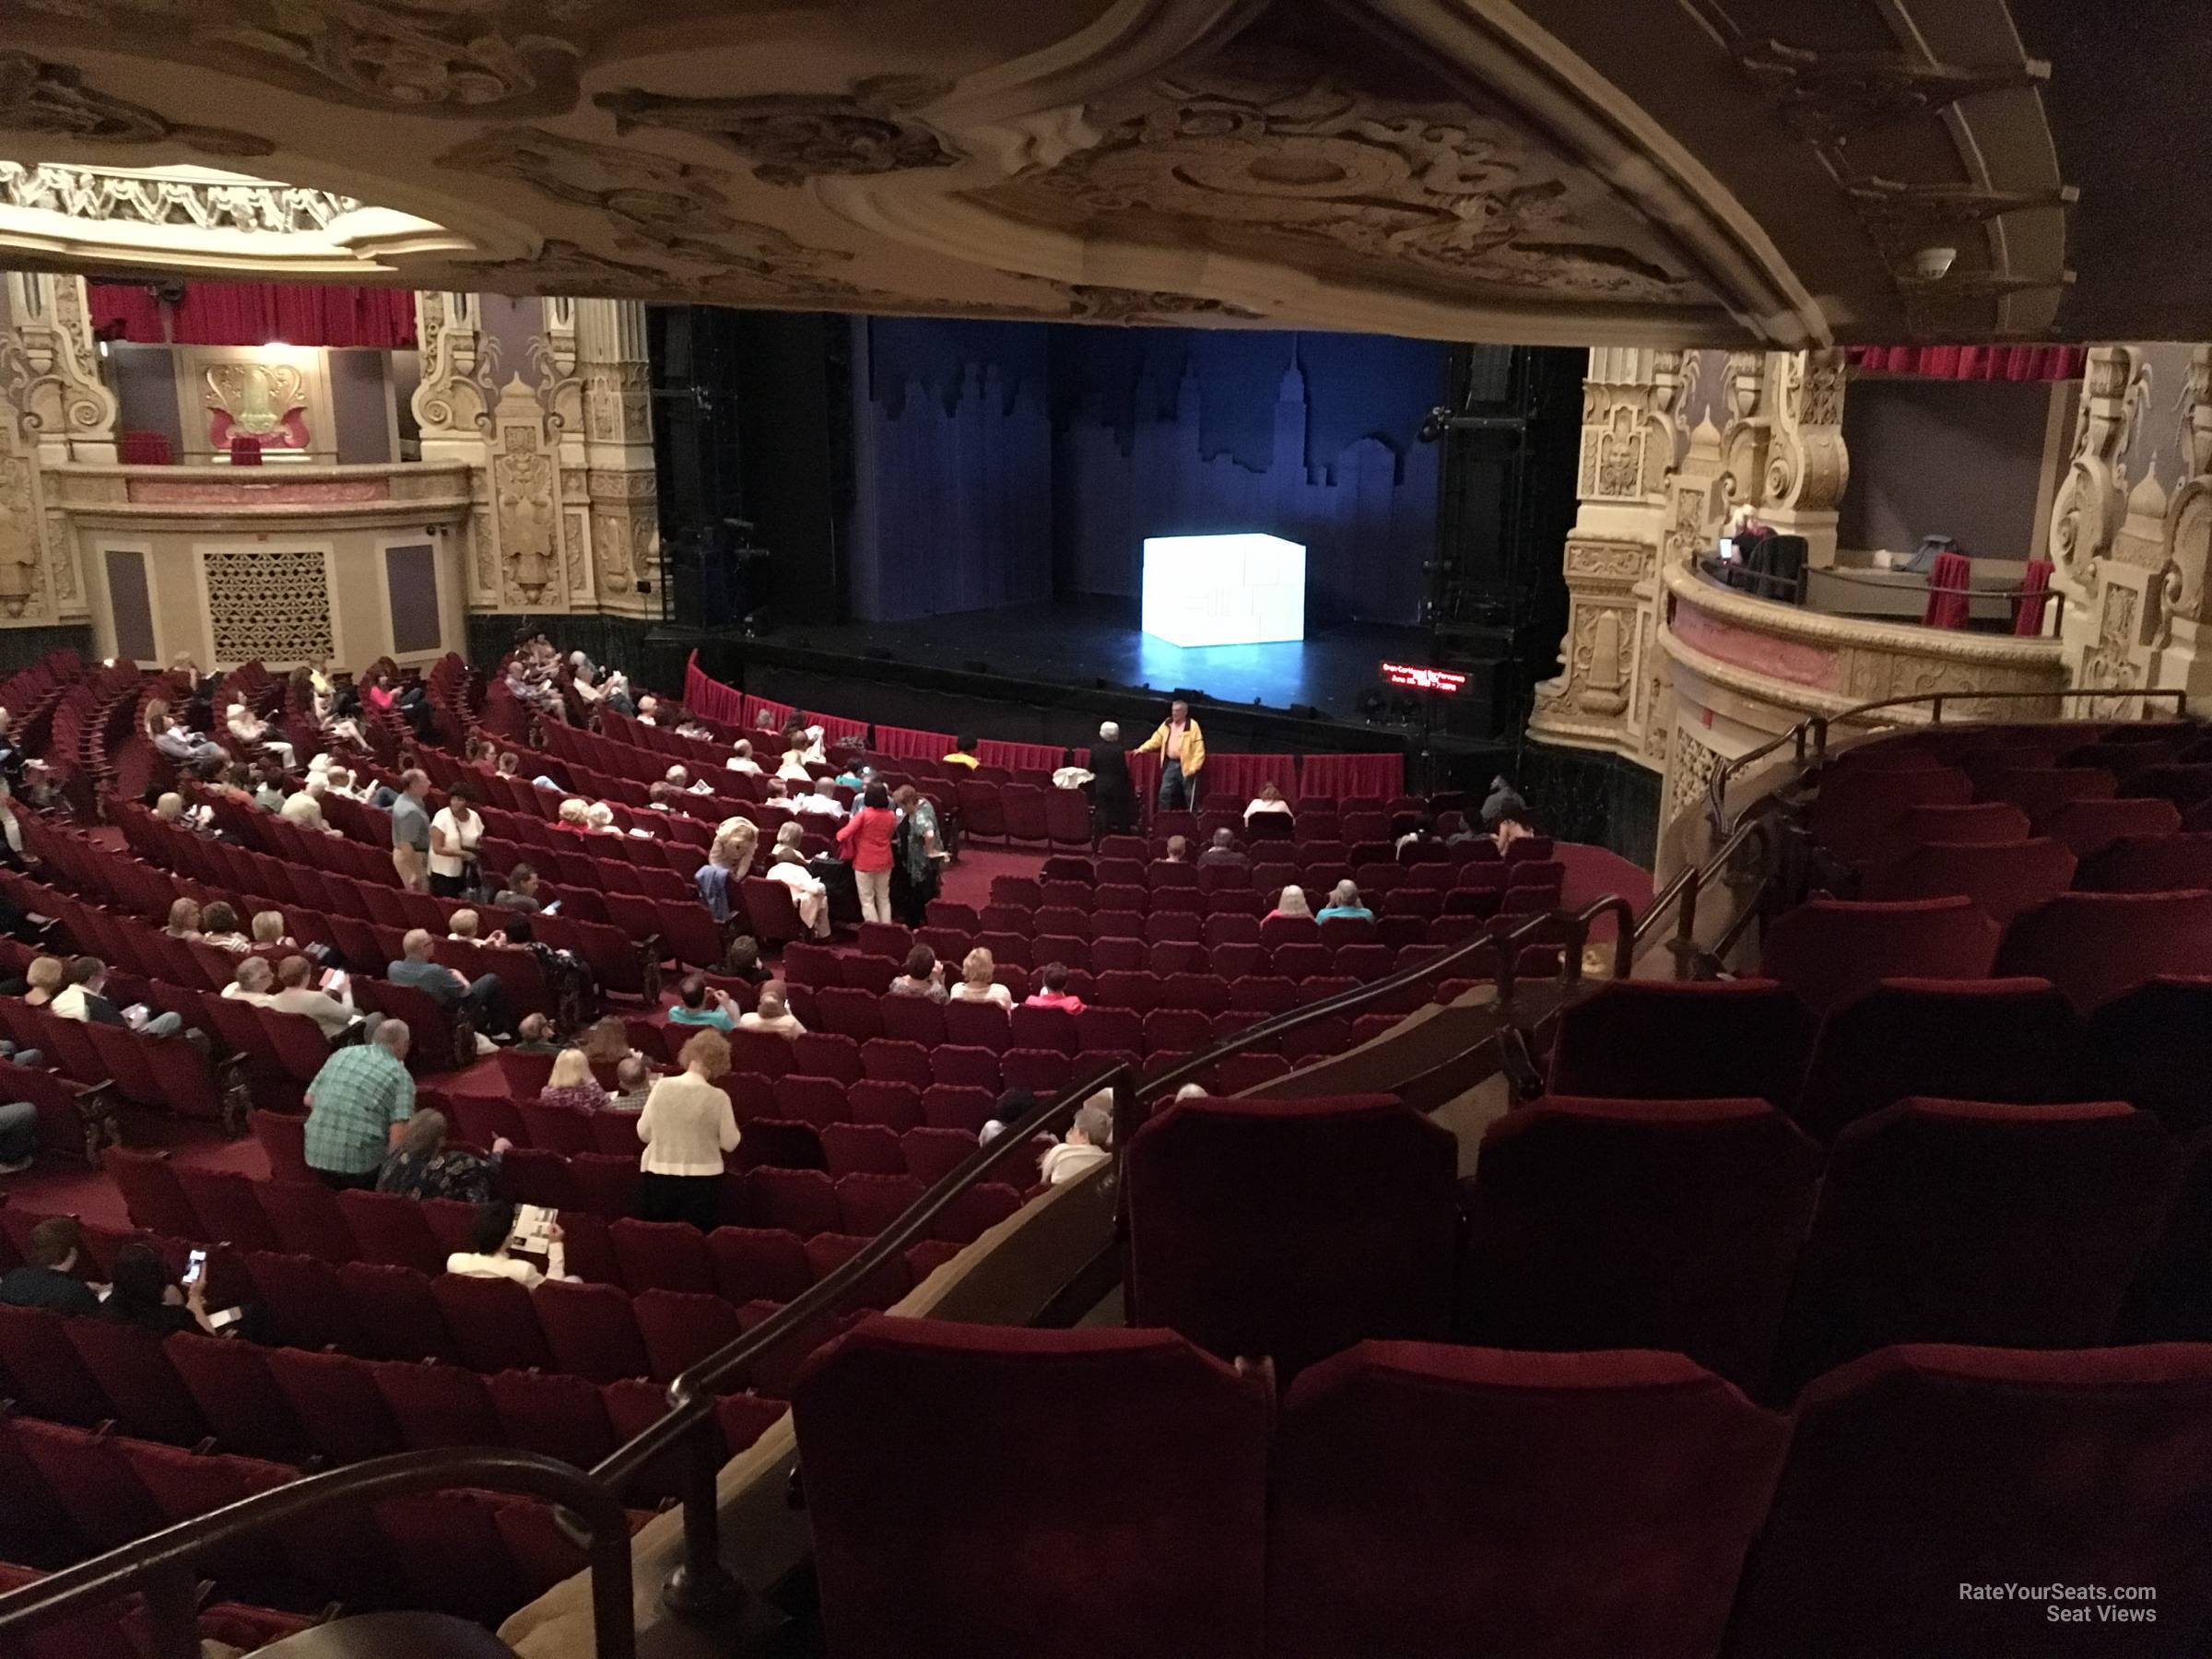 dress circle right, row mm seat view  - nederlander theatre (chicago)